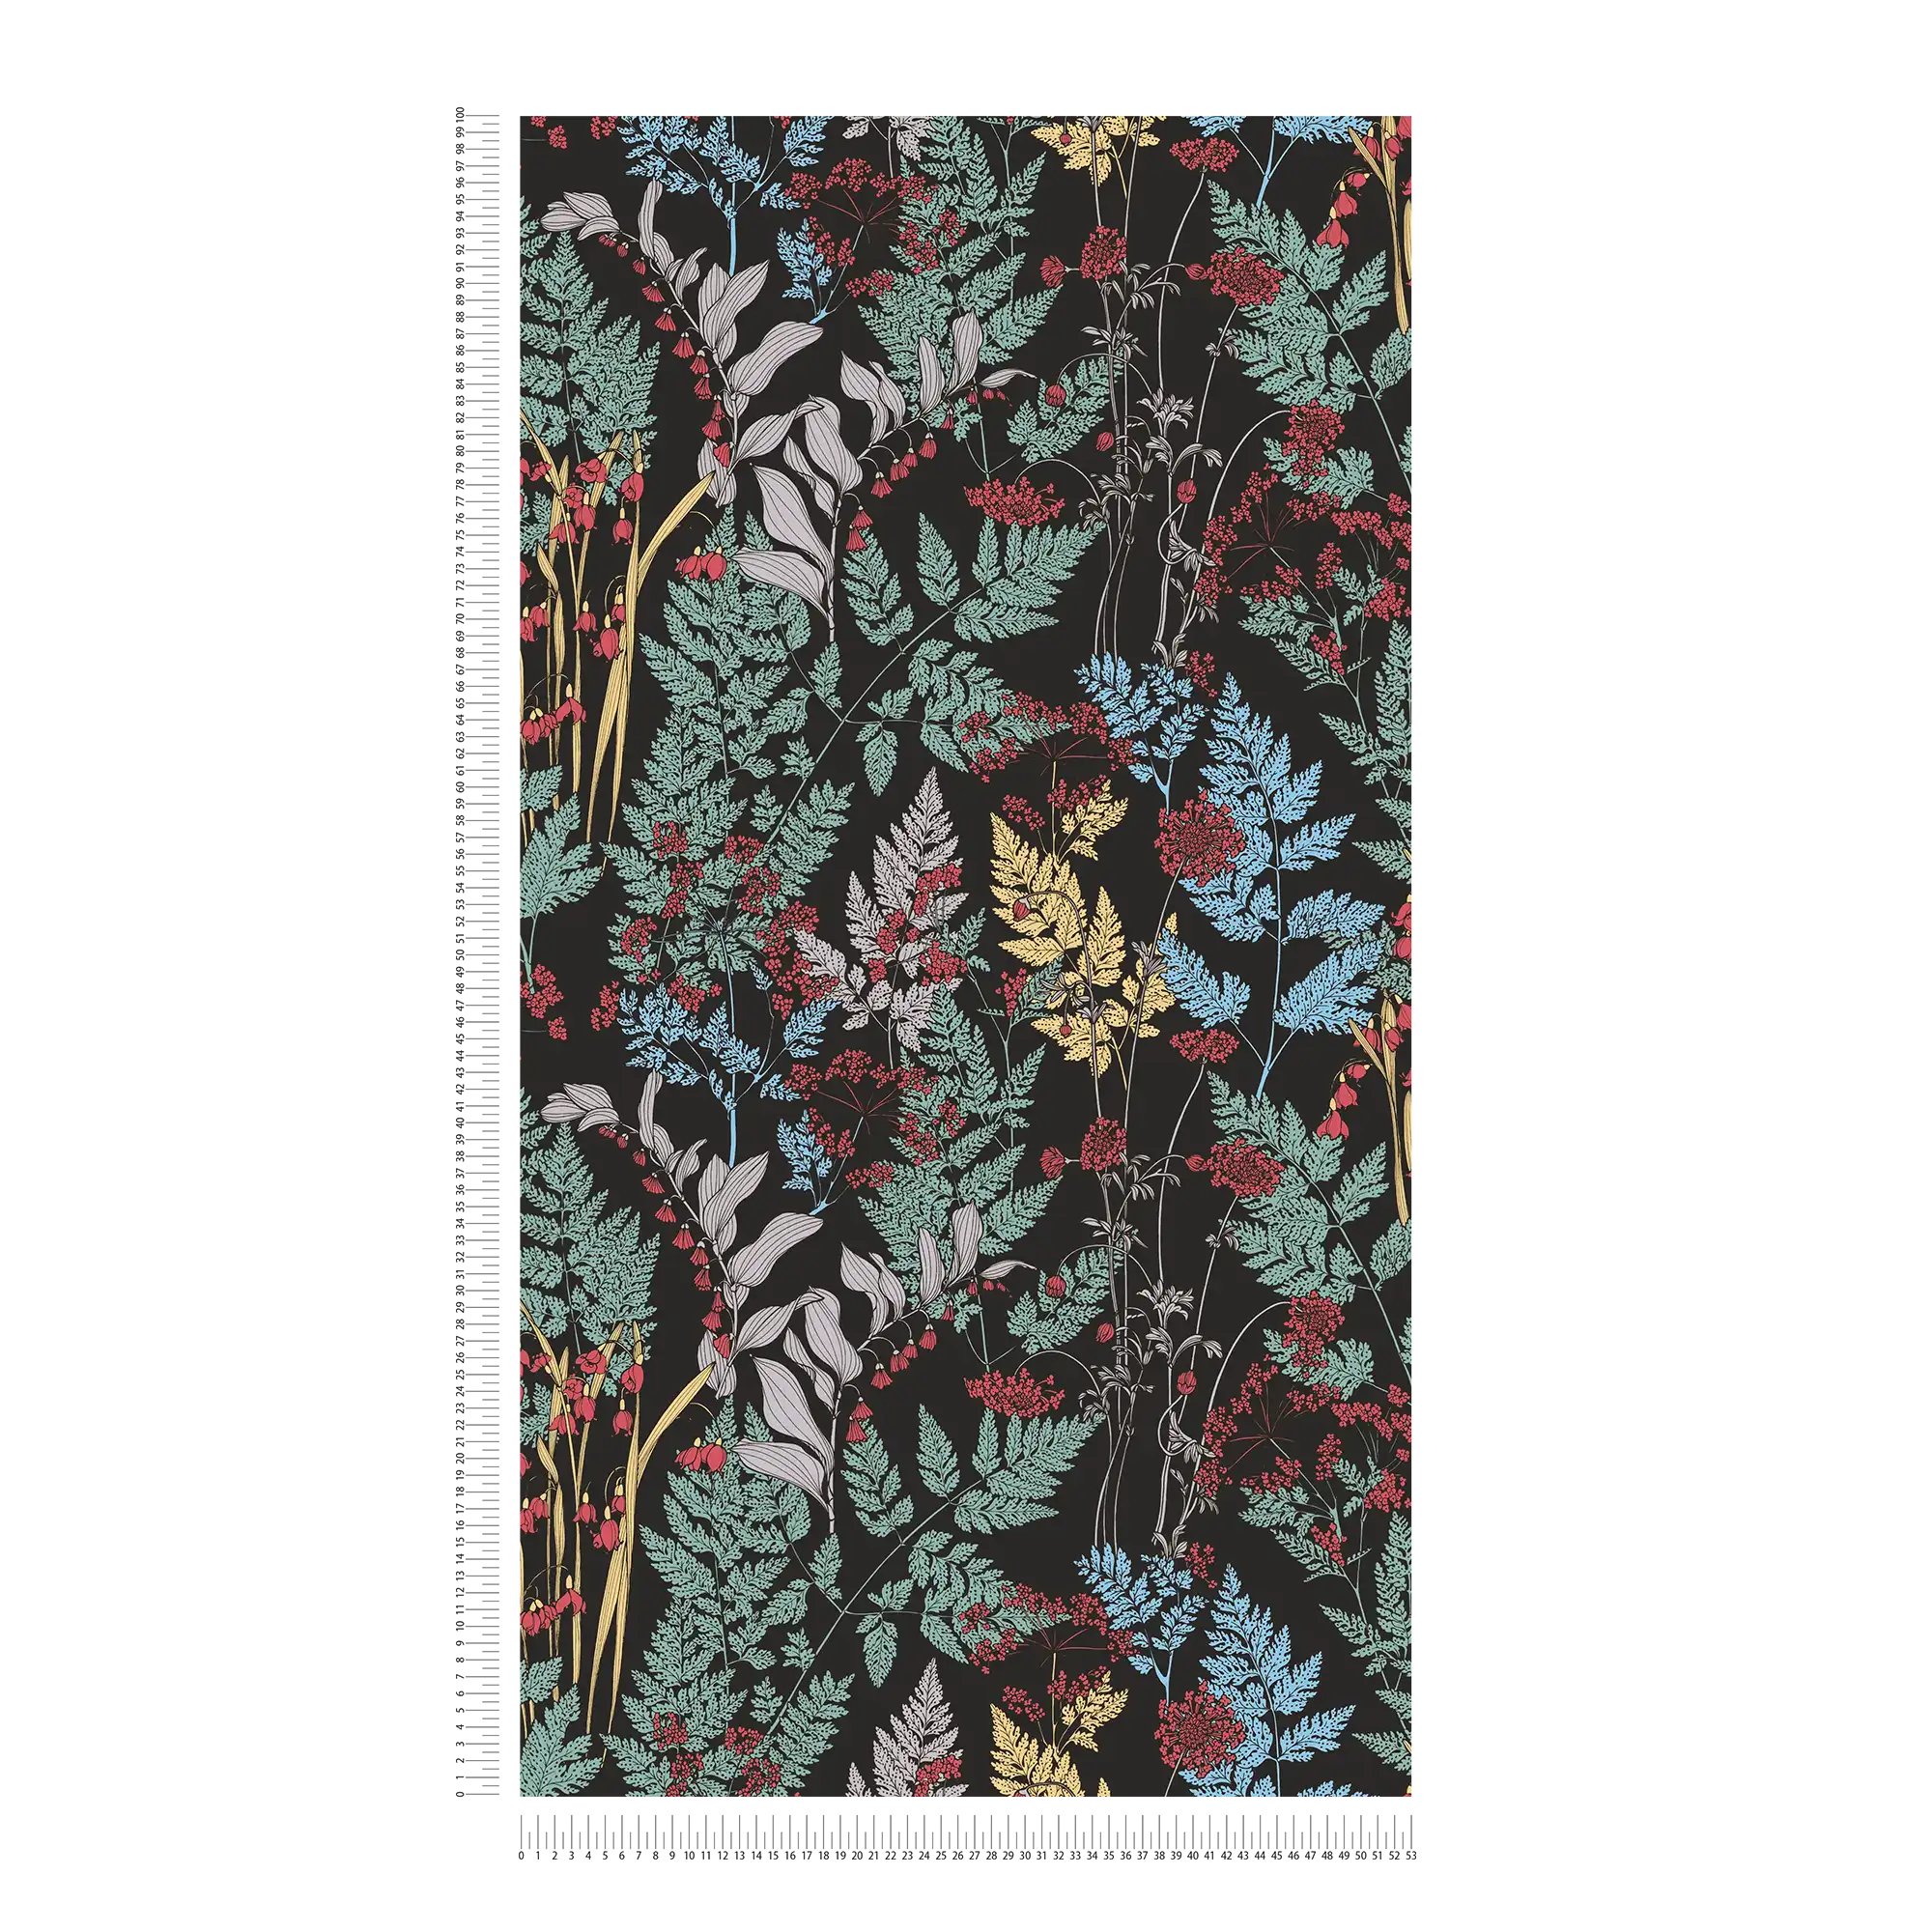             Non-woven wallpaper flowers & leaves motif in drawing style - black, green, yellow
        